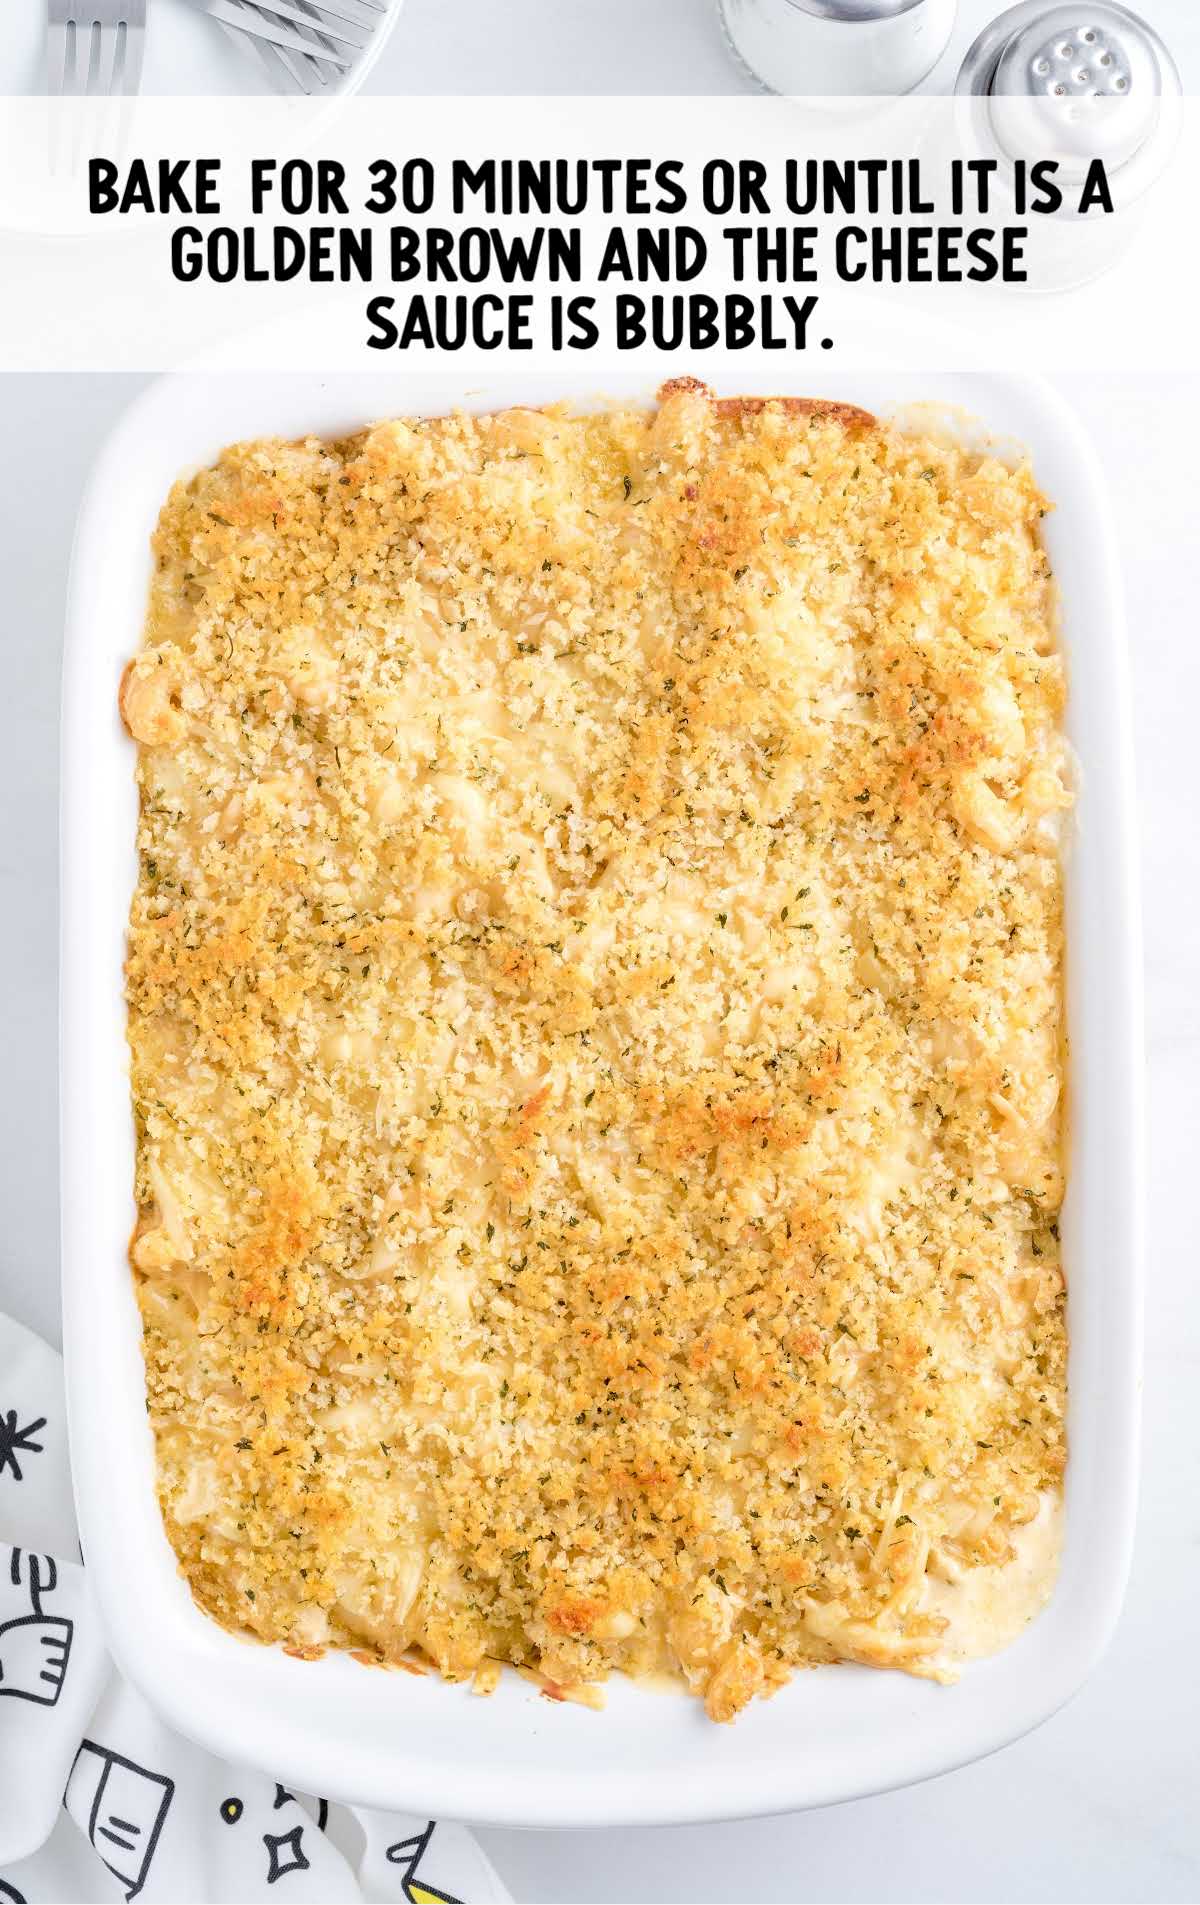 Mac and cheese being baked in a casserole dish